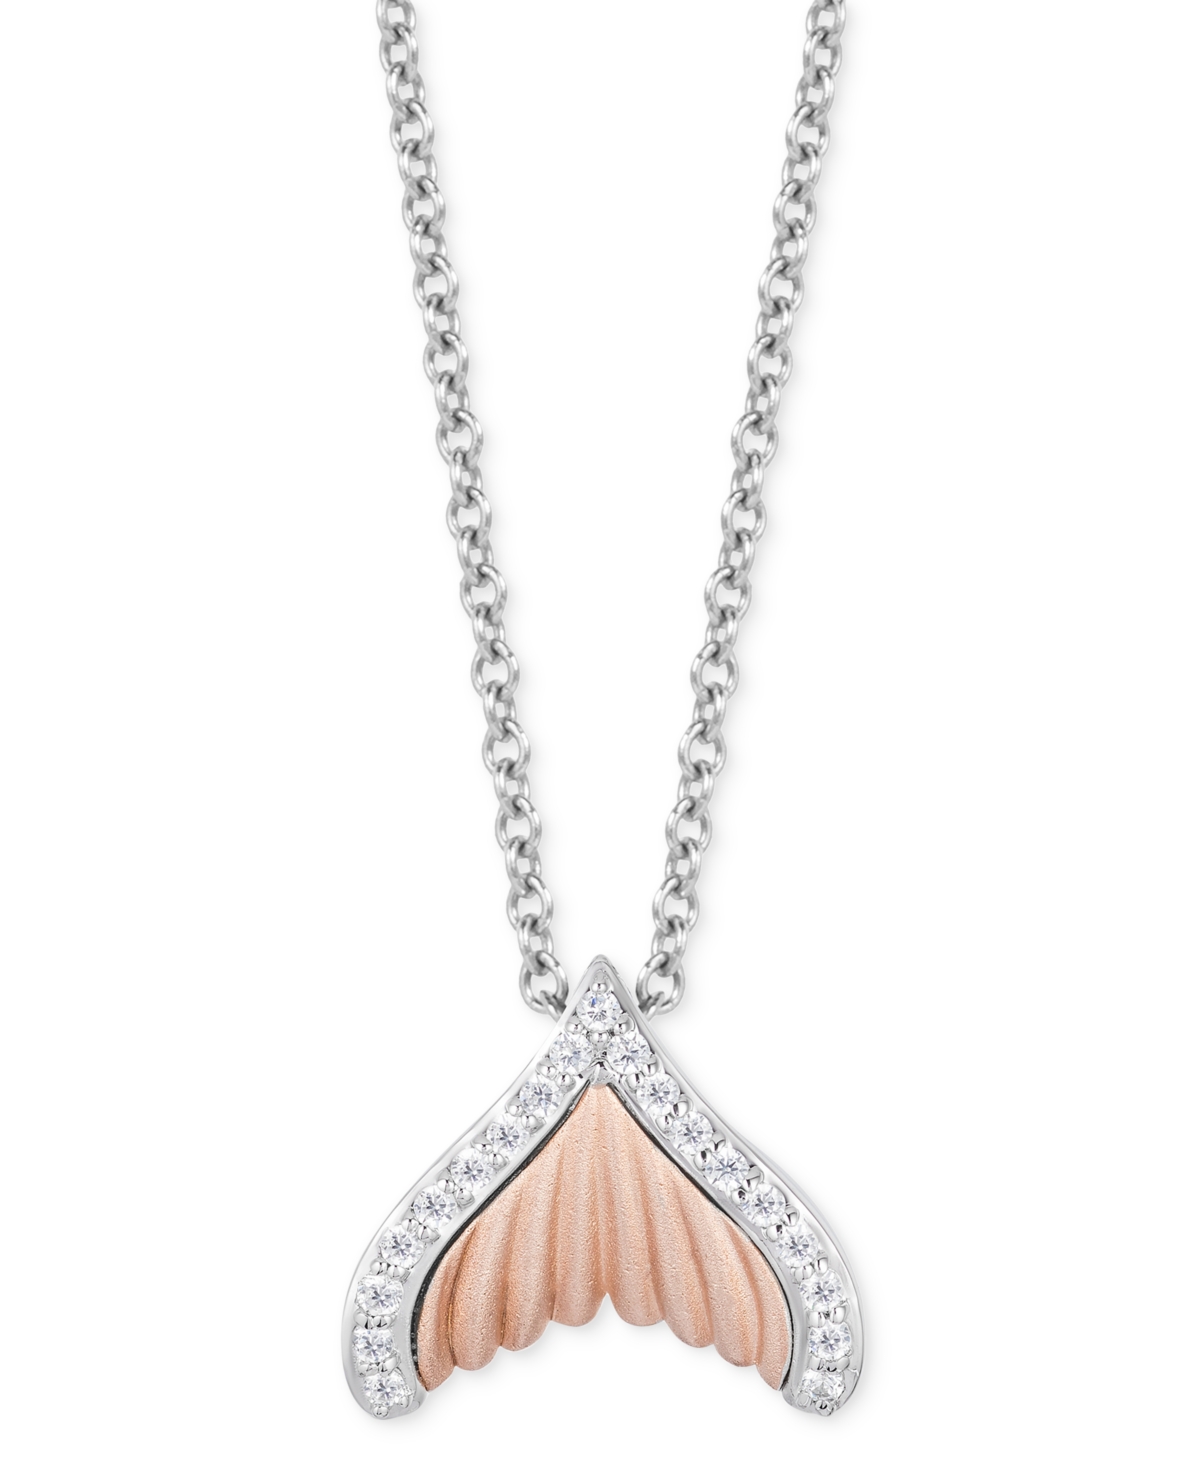 Diamond Ariel Mermaid Tail Pendant Necklace (1/6 ct. t.w.) in Sterling Silver & 10k Rose Gold - Two-Tone